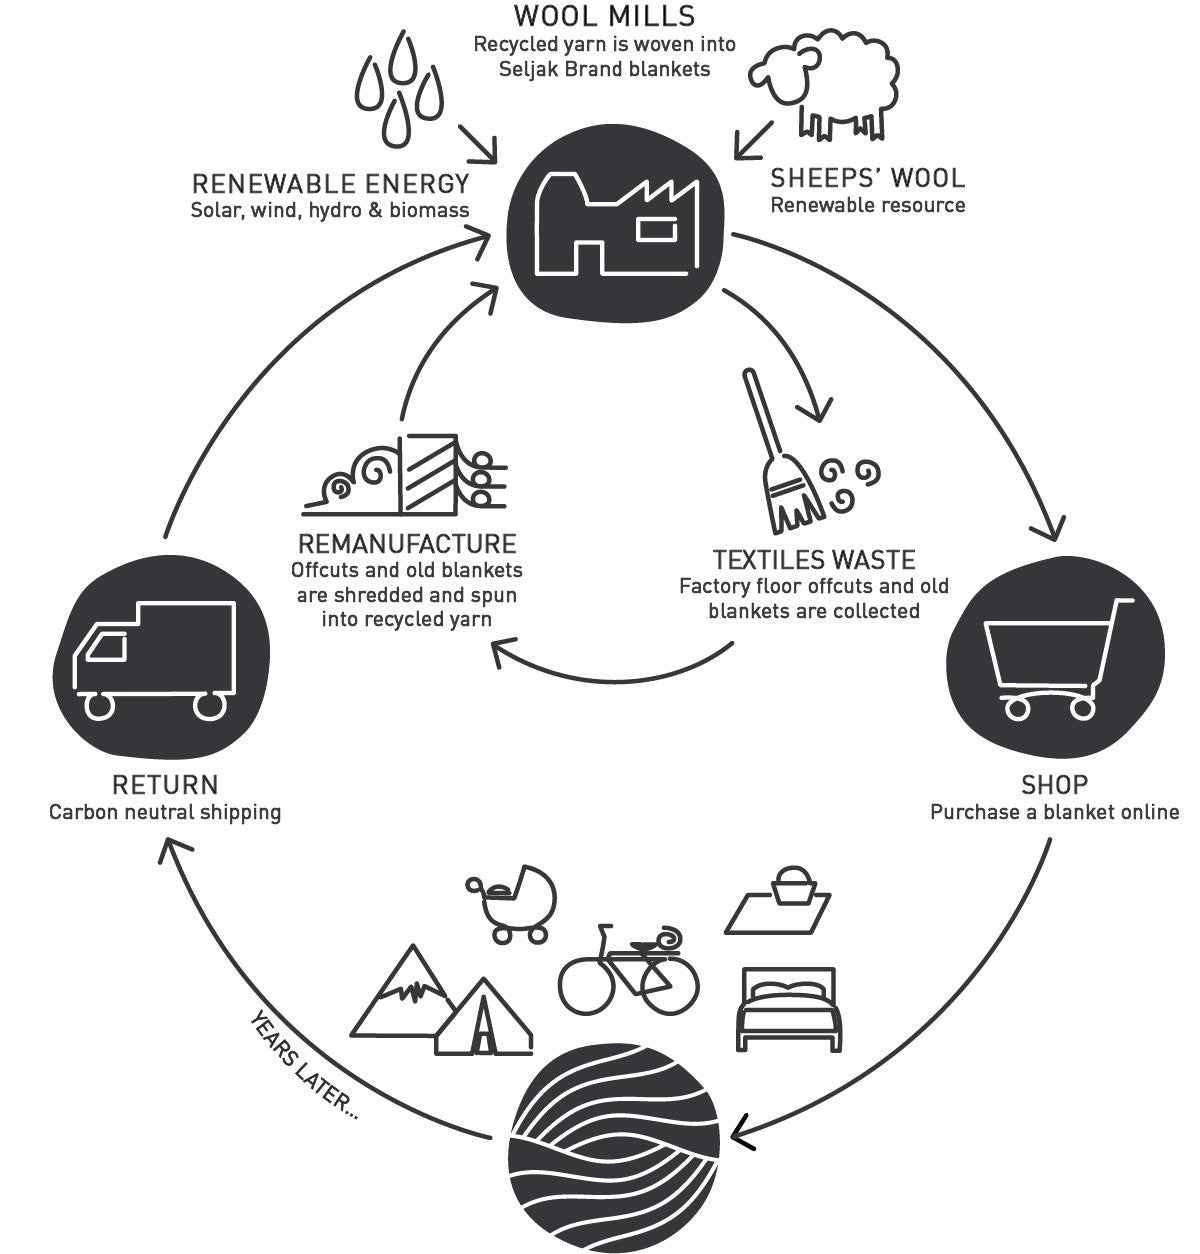 A diagram showing the life cycle of a Seljak Brand Pinot Blanket – Fringe.